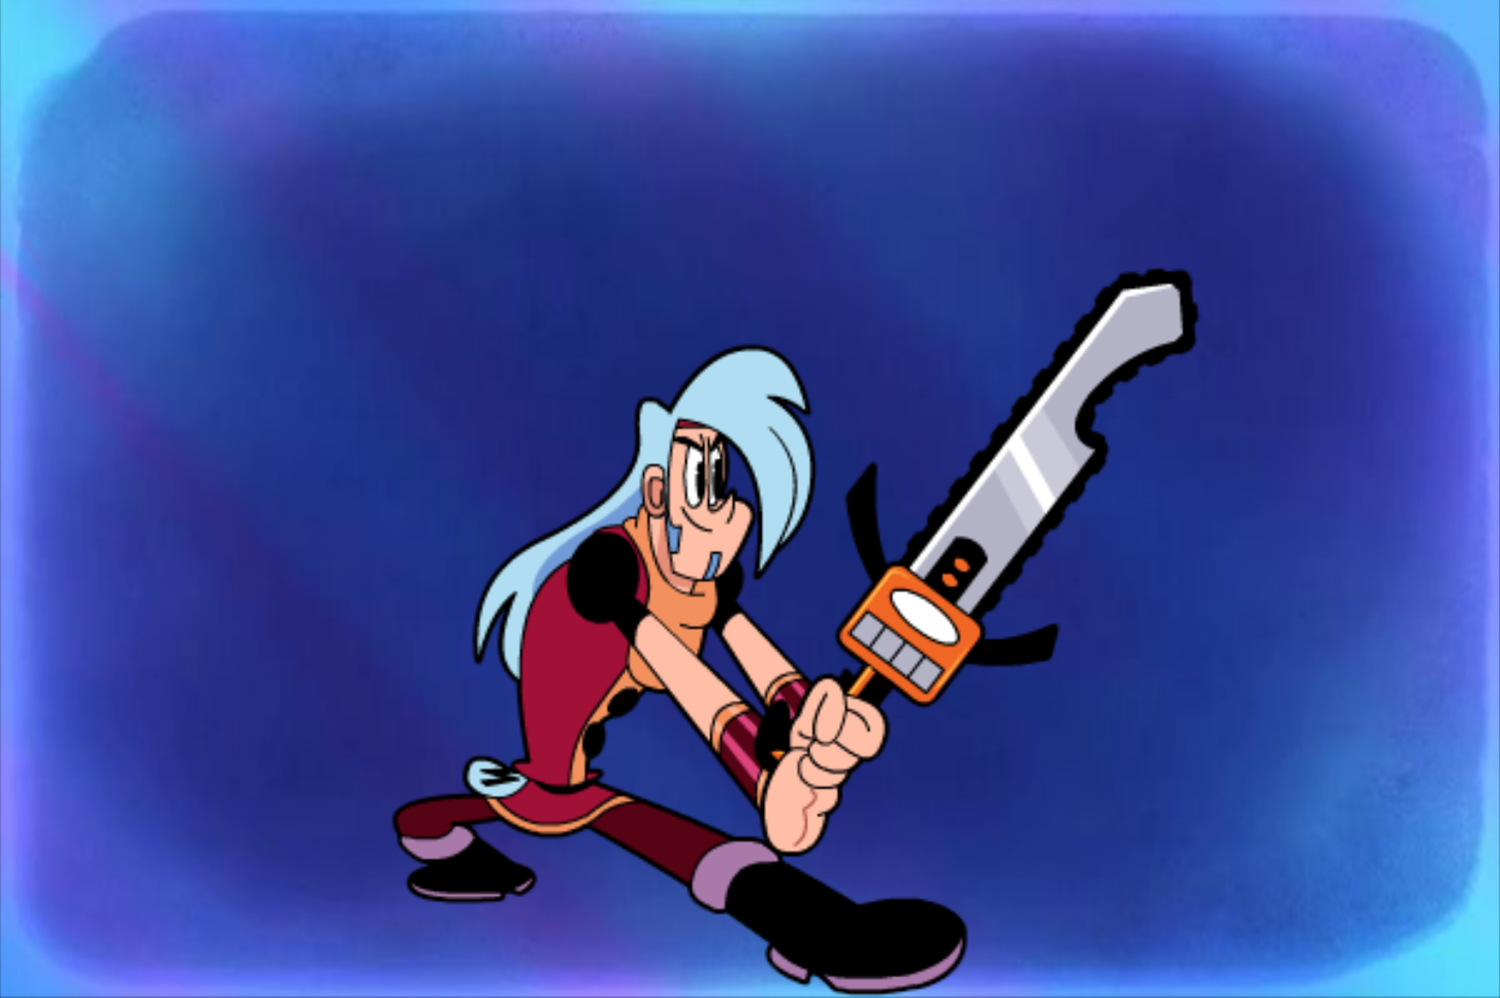 Mighty MagiSwords Hoversword Hustle Game Chainsaw Magisword Intro Screenshot.